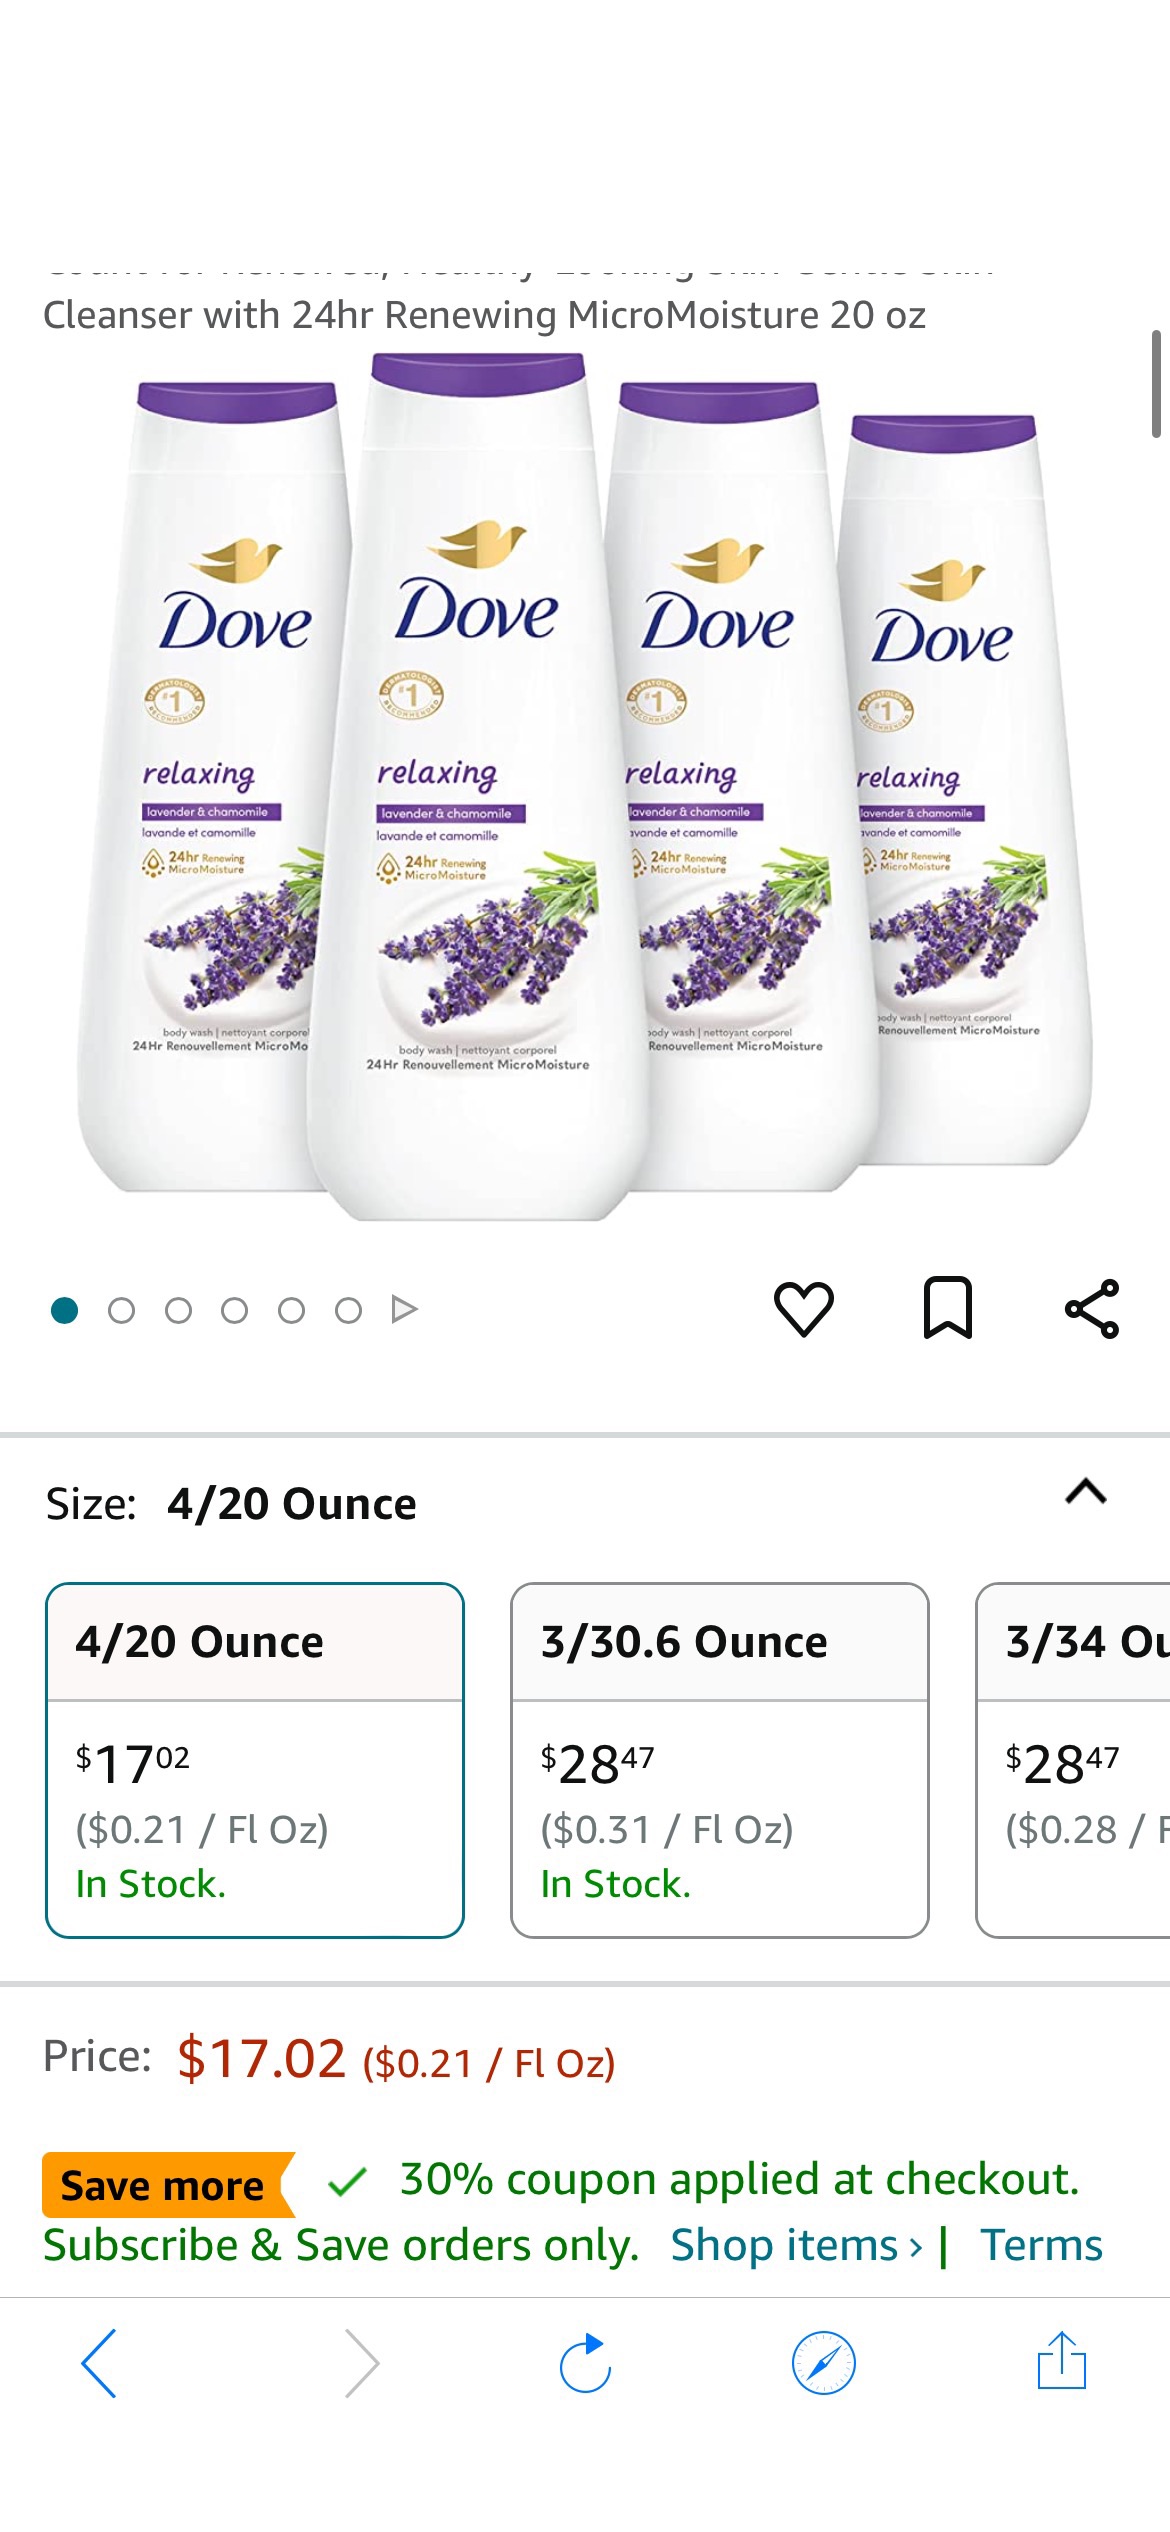 Amazon.com : Dove Body Wash Relaxing Lavender Oil & Chamomile 4 Count for Renewed, Healthy-Looking Skin Gentle Skin Cleanser with 24hr Renewing MicroMoisture 20 oz : Beauty & Personal Care